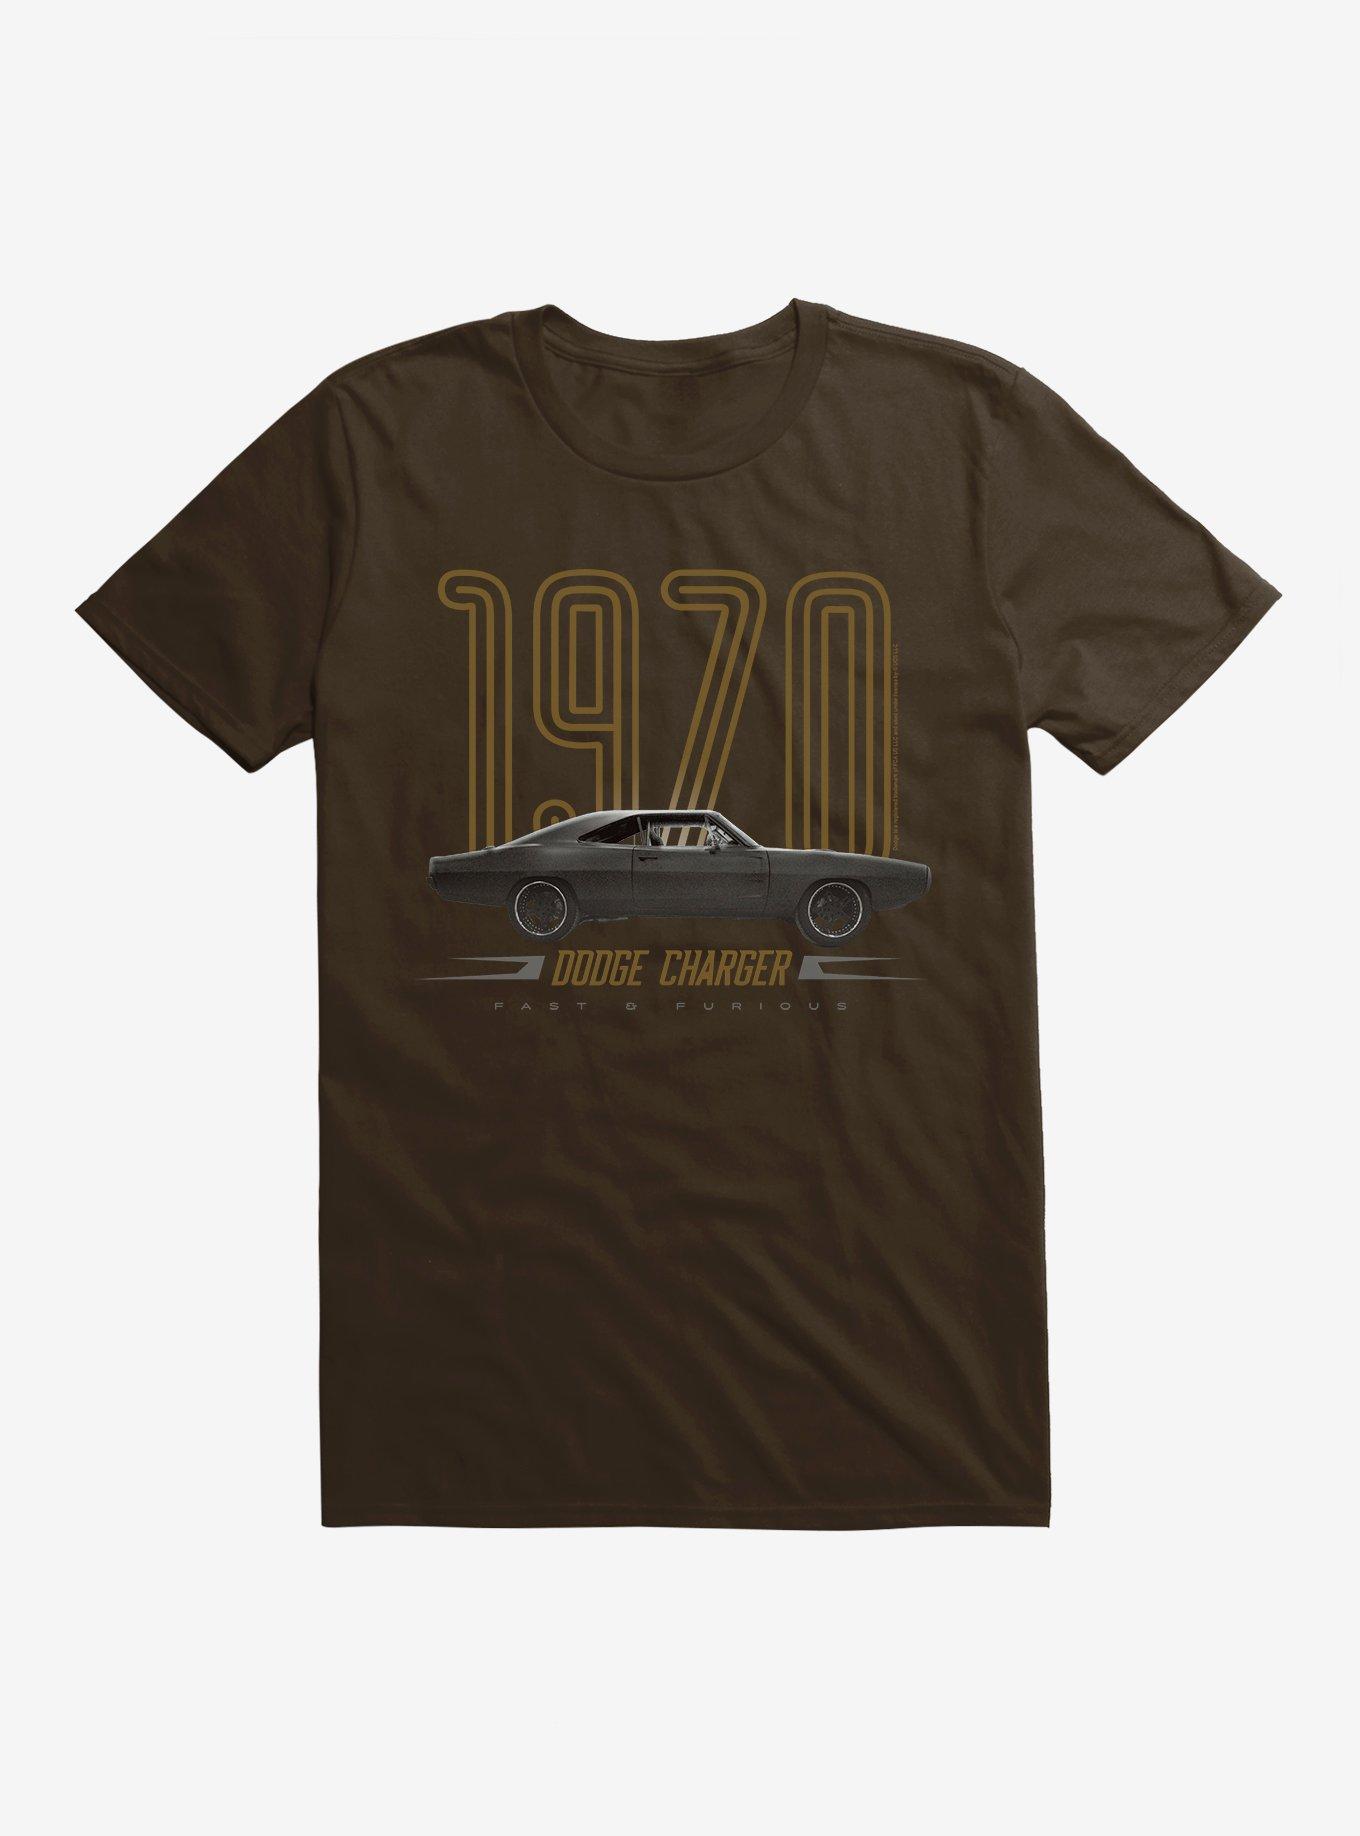 Fast & Furious 1970 Dodge Charger T-Shirt, CHOCOLATE, hi-res